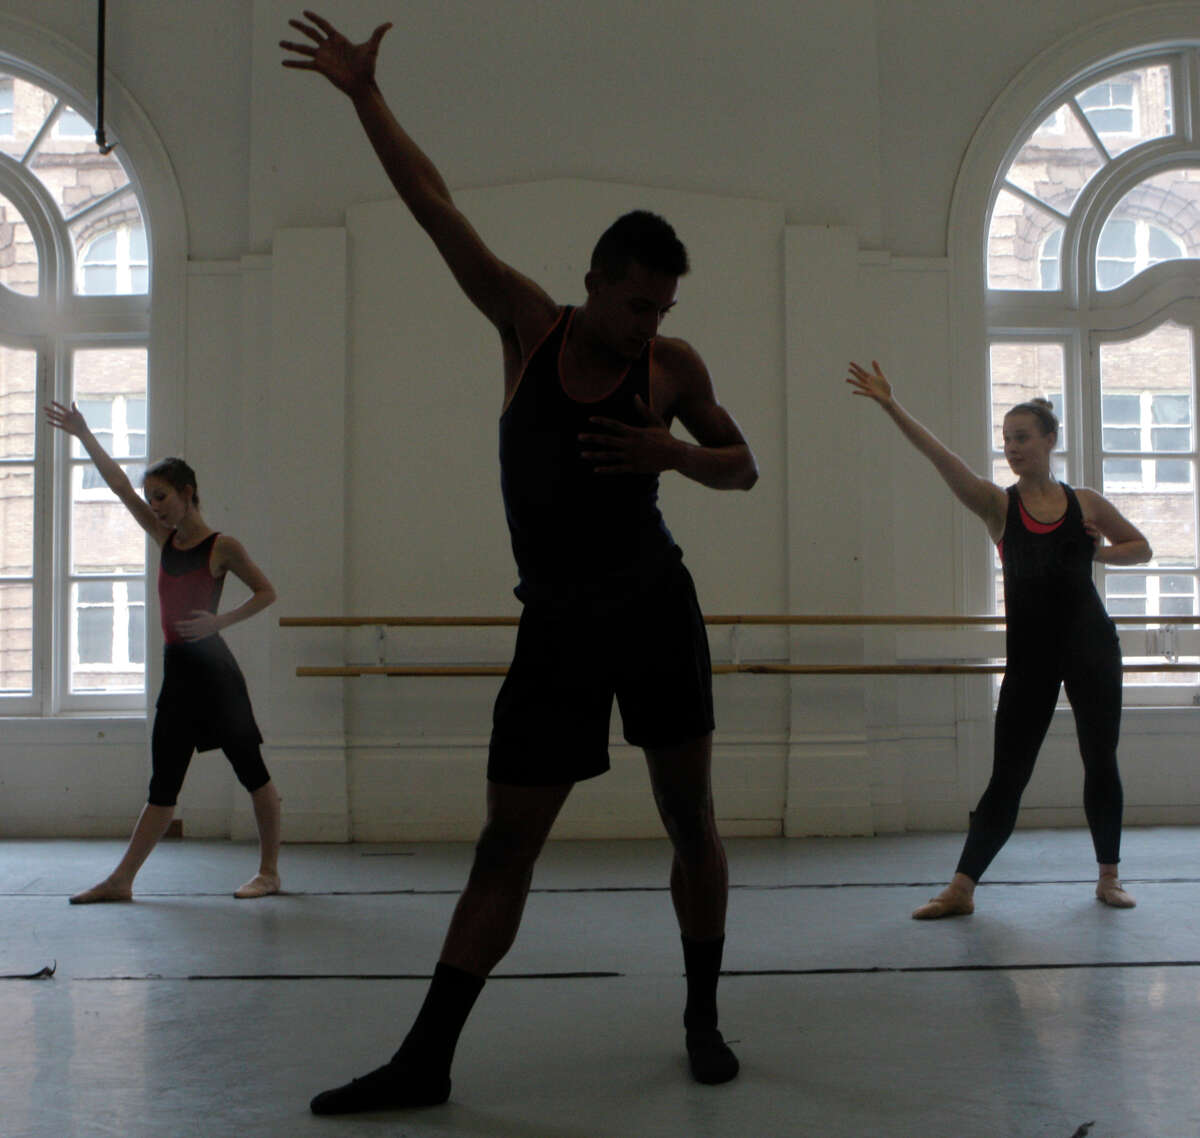 Rachel Furst (left), Isaiah Bindel and Jordan Drew rehearse their performance for Gregory Dawson in the Alonzo King Lines Ballet Dance Center in San Francisco.